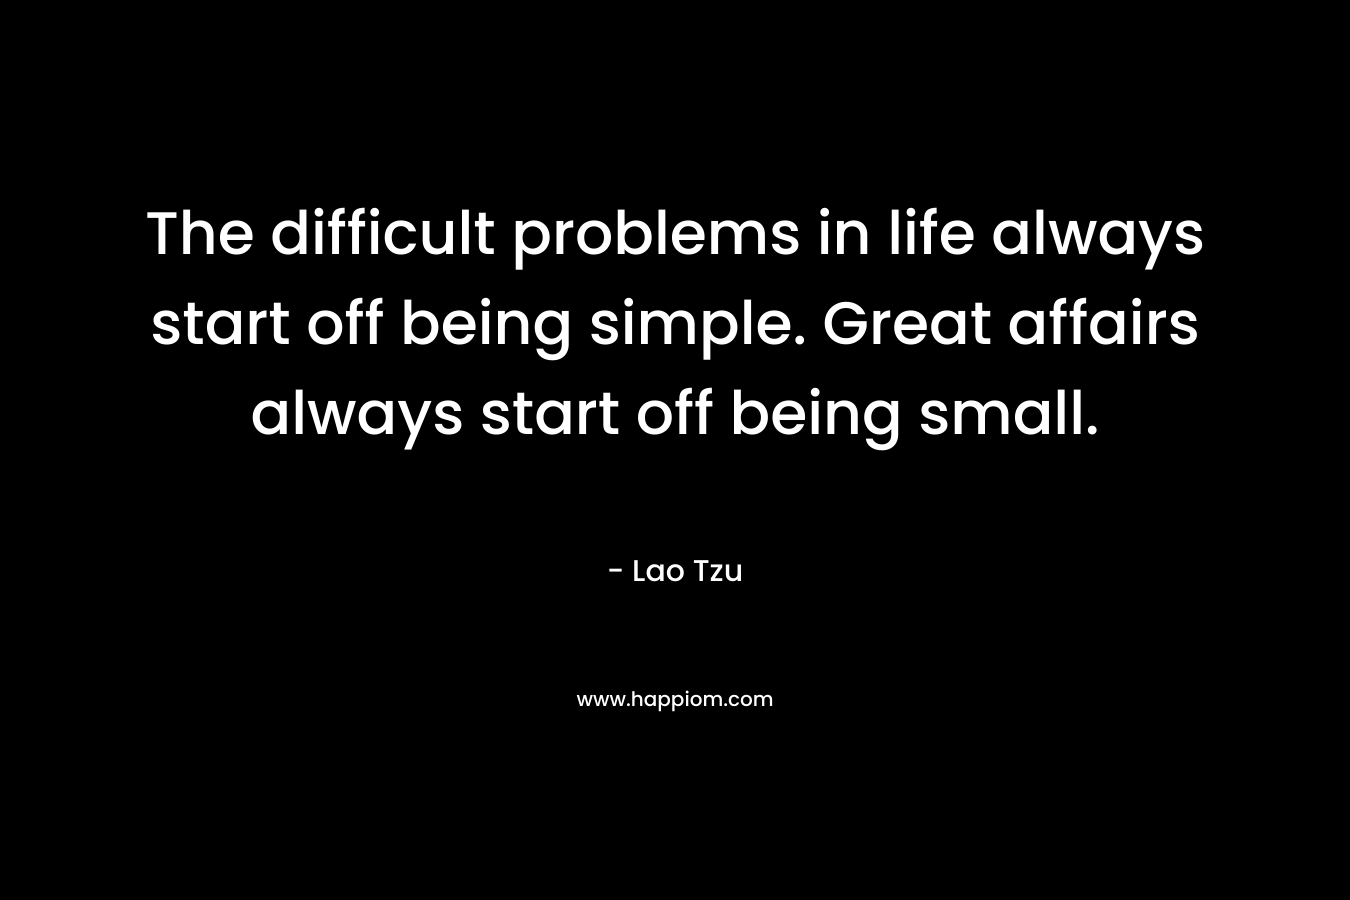 The difficult problems in life always start off being simple. Great affairs always start off being small. – Lao Tzu